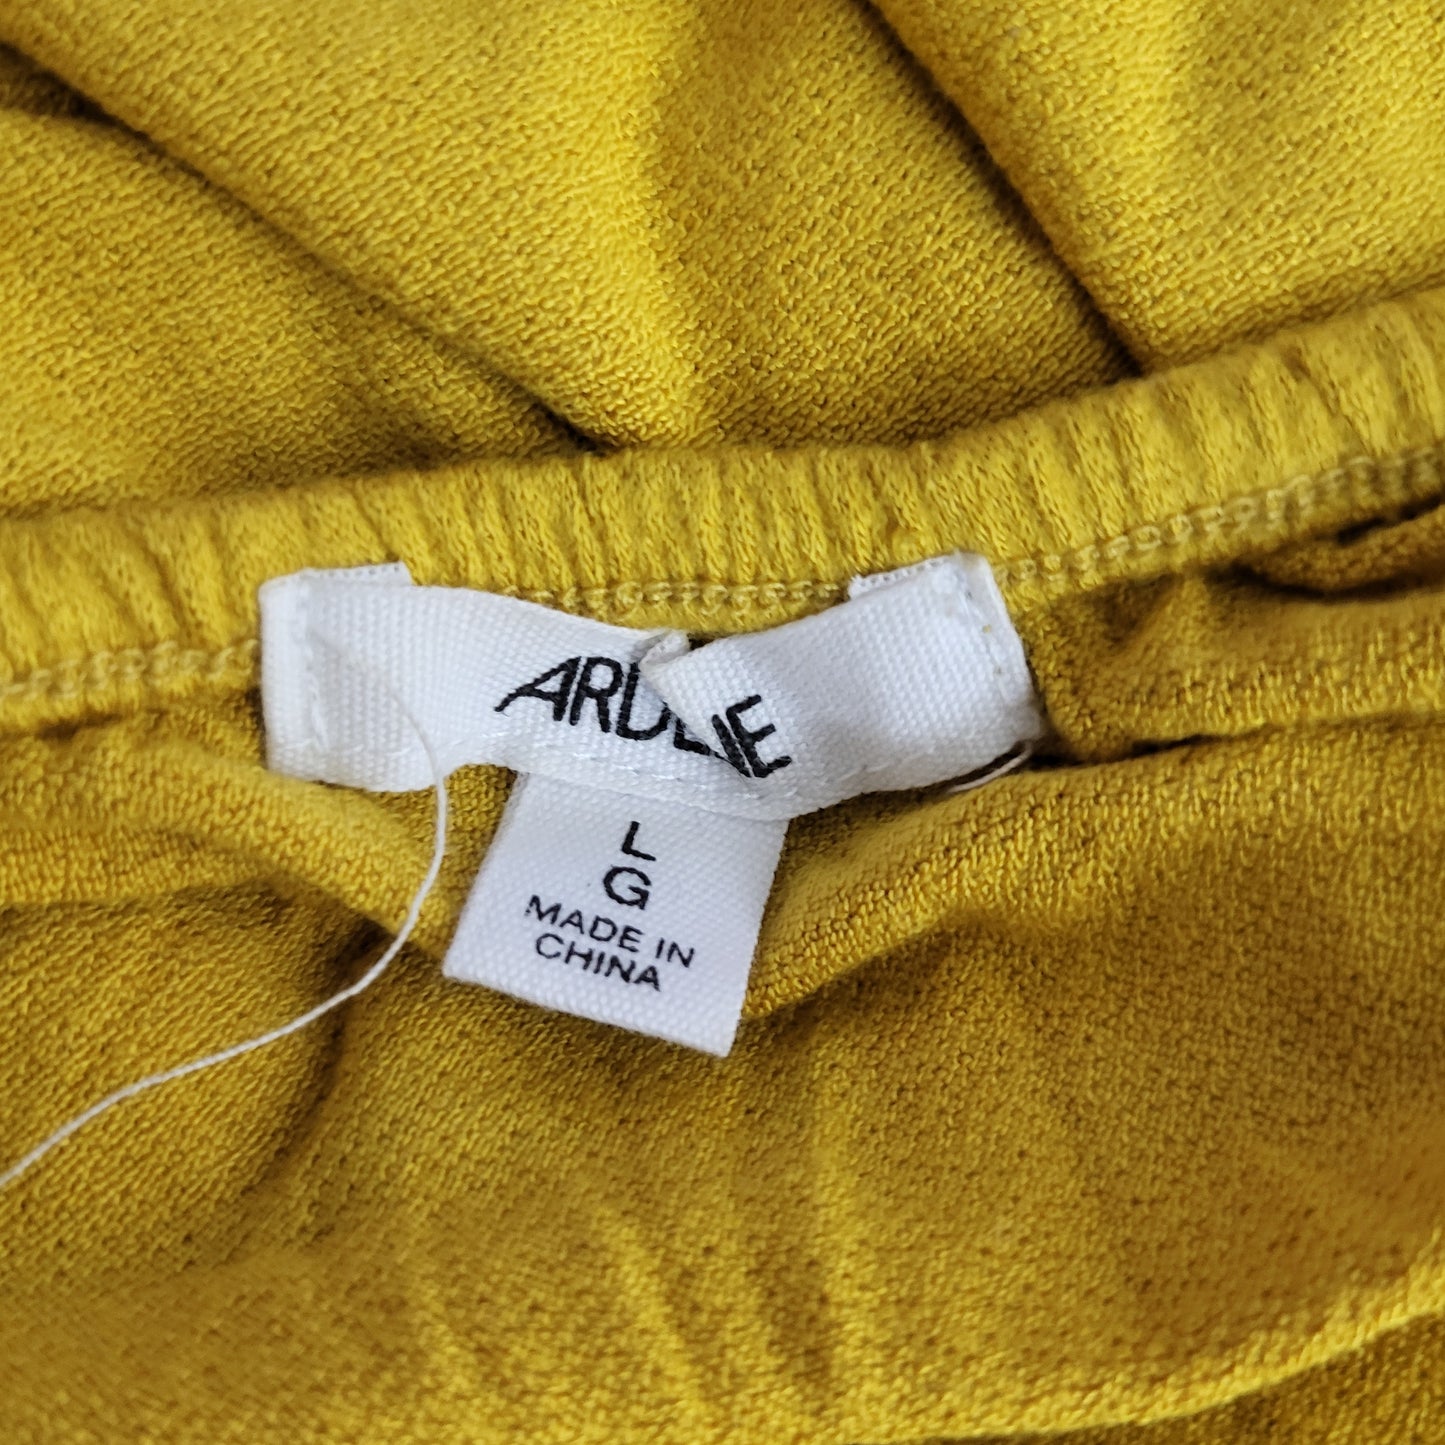 CHND2 - Ardene yellow rayon tank, size large, good condition